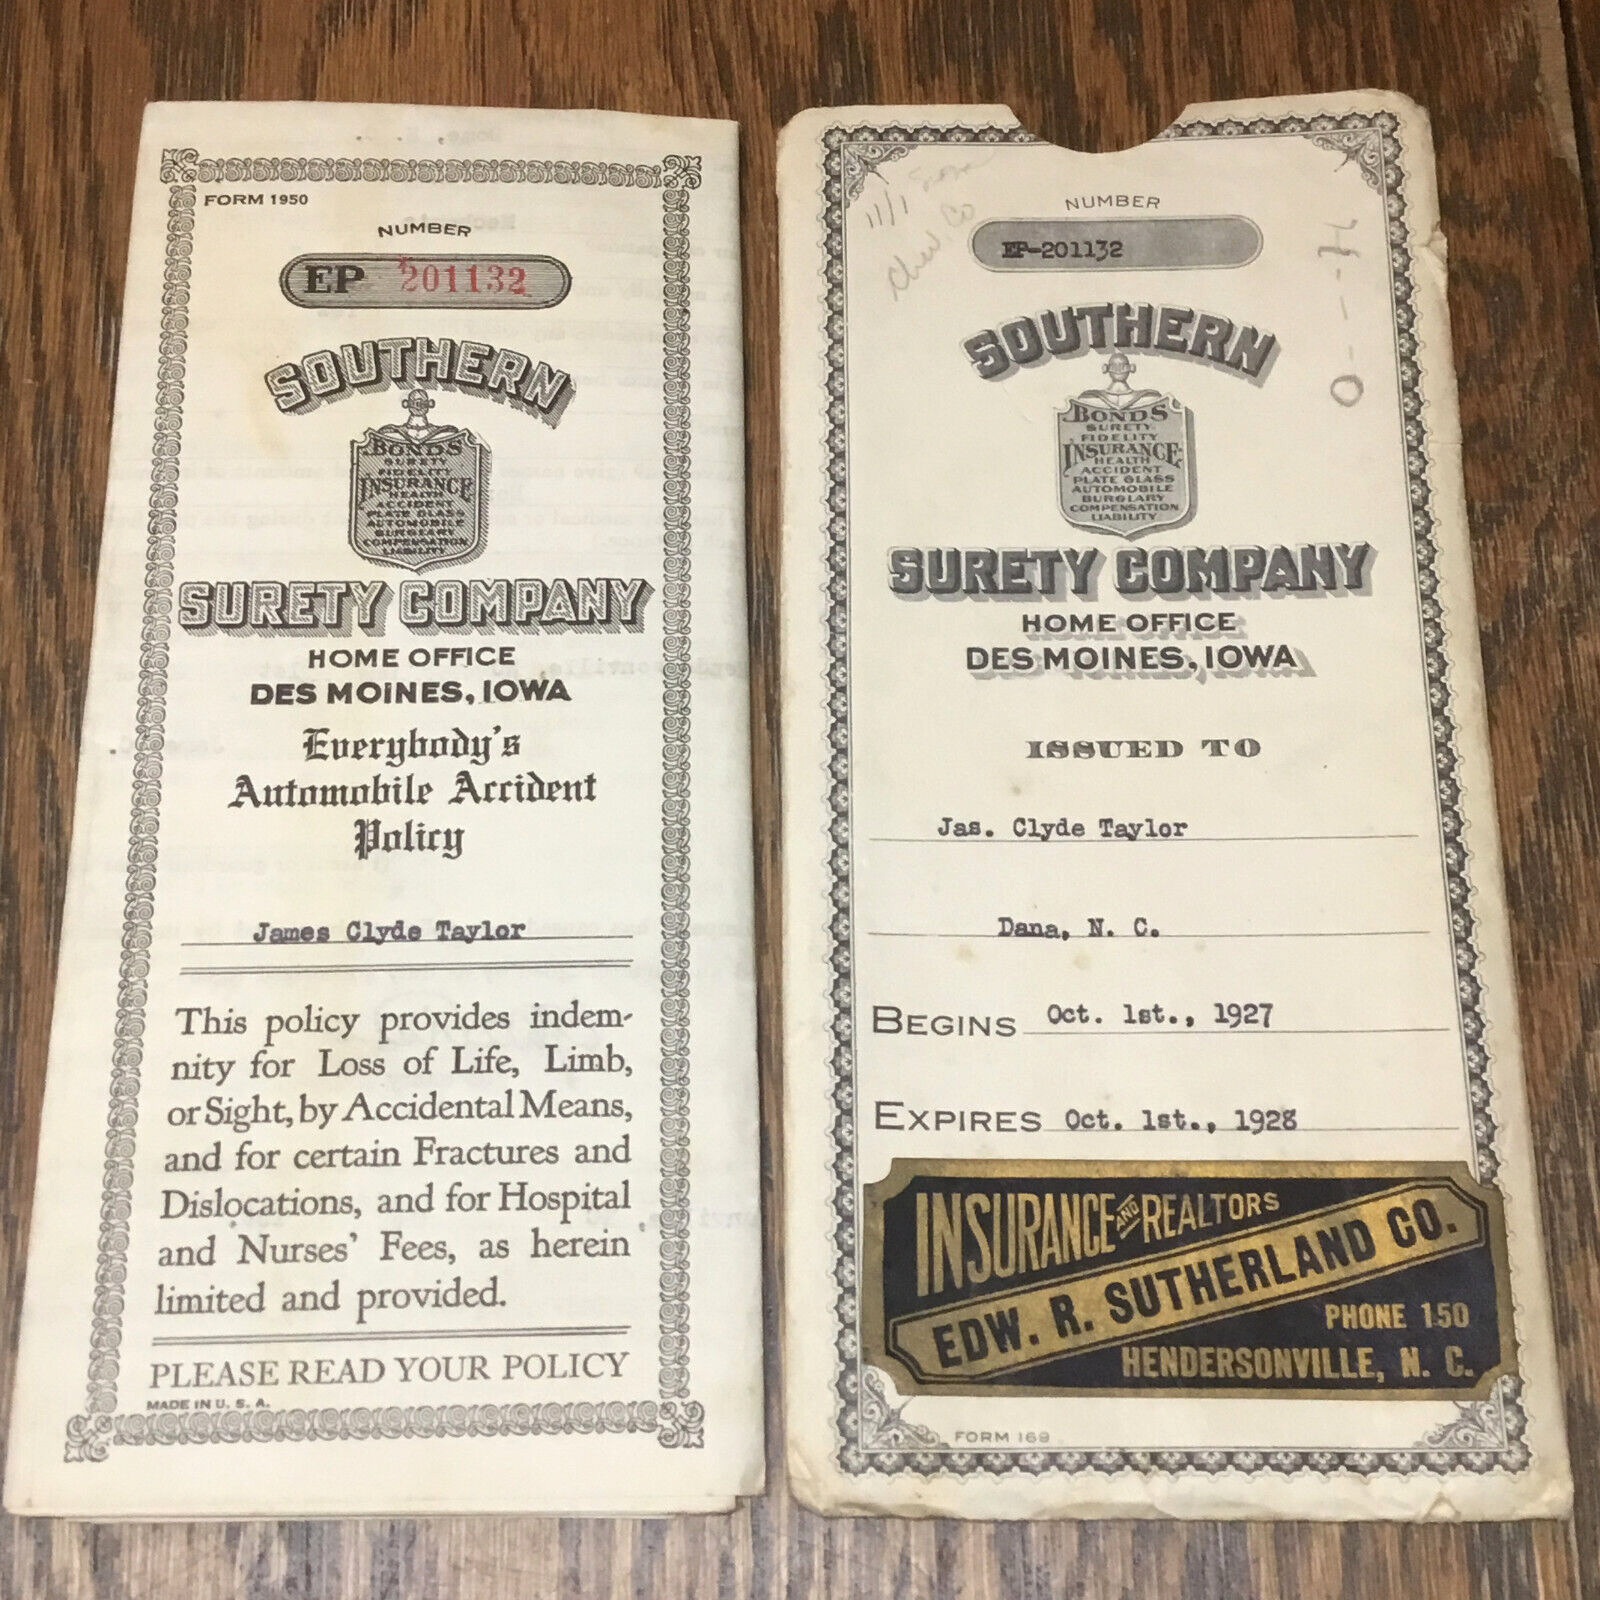 1927-1928 Southern Surety Company Des Moines, Iowa Automobile Accident Policy